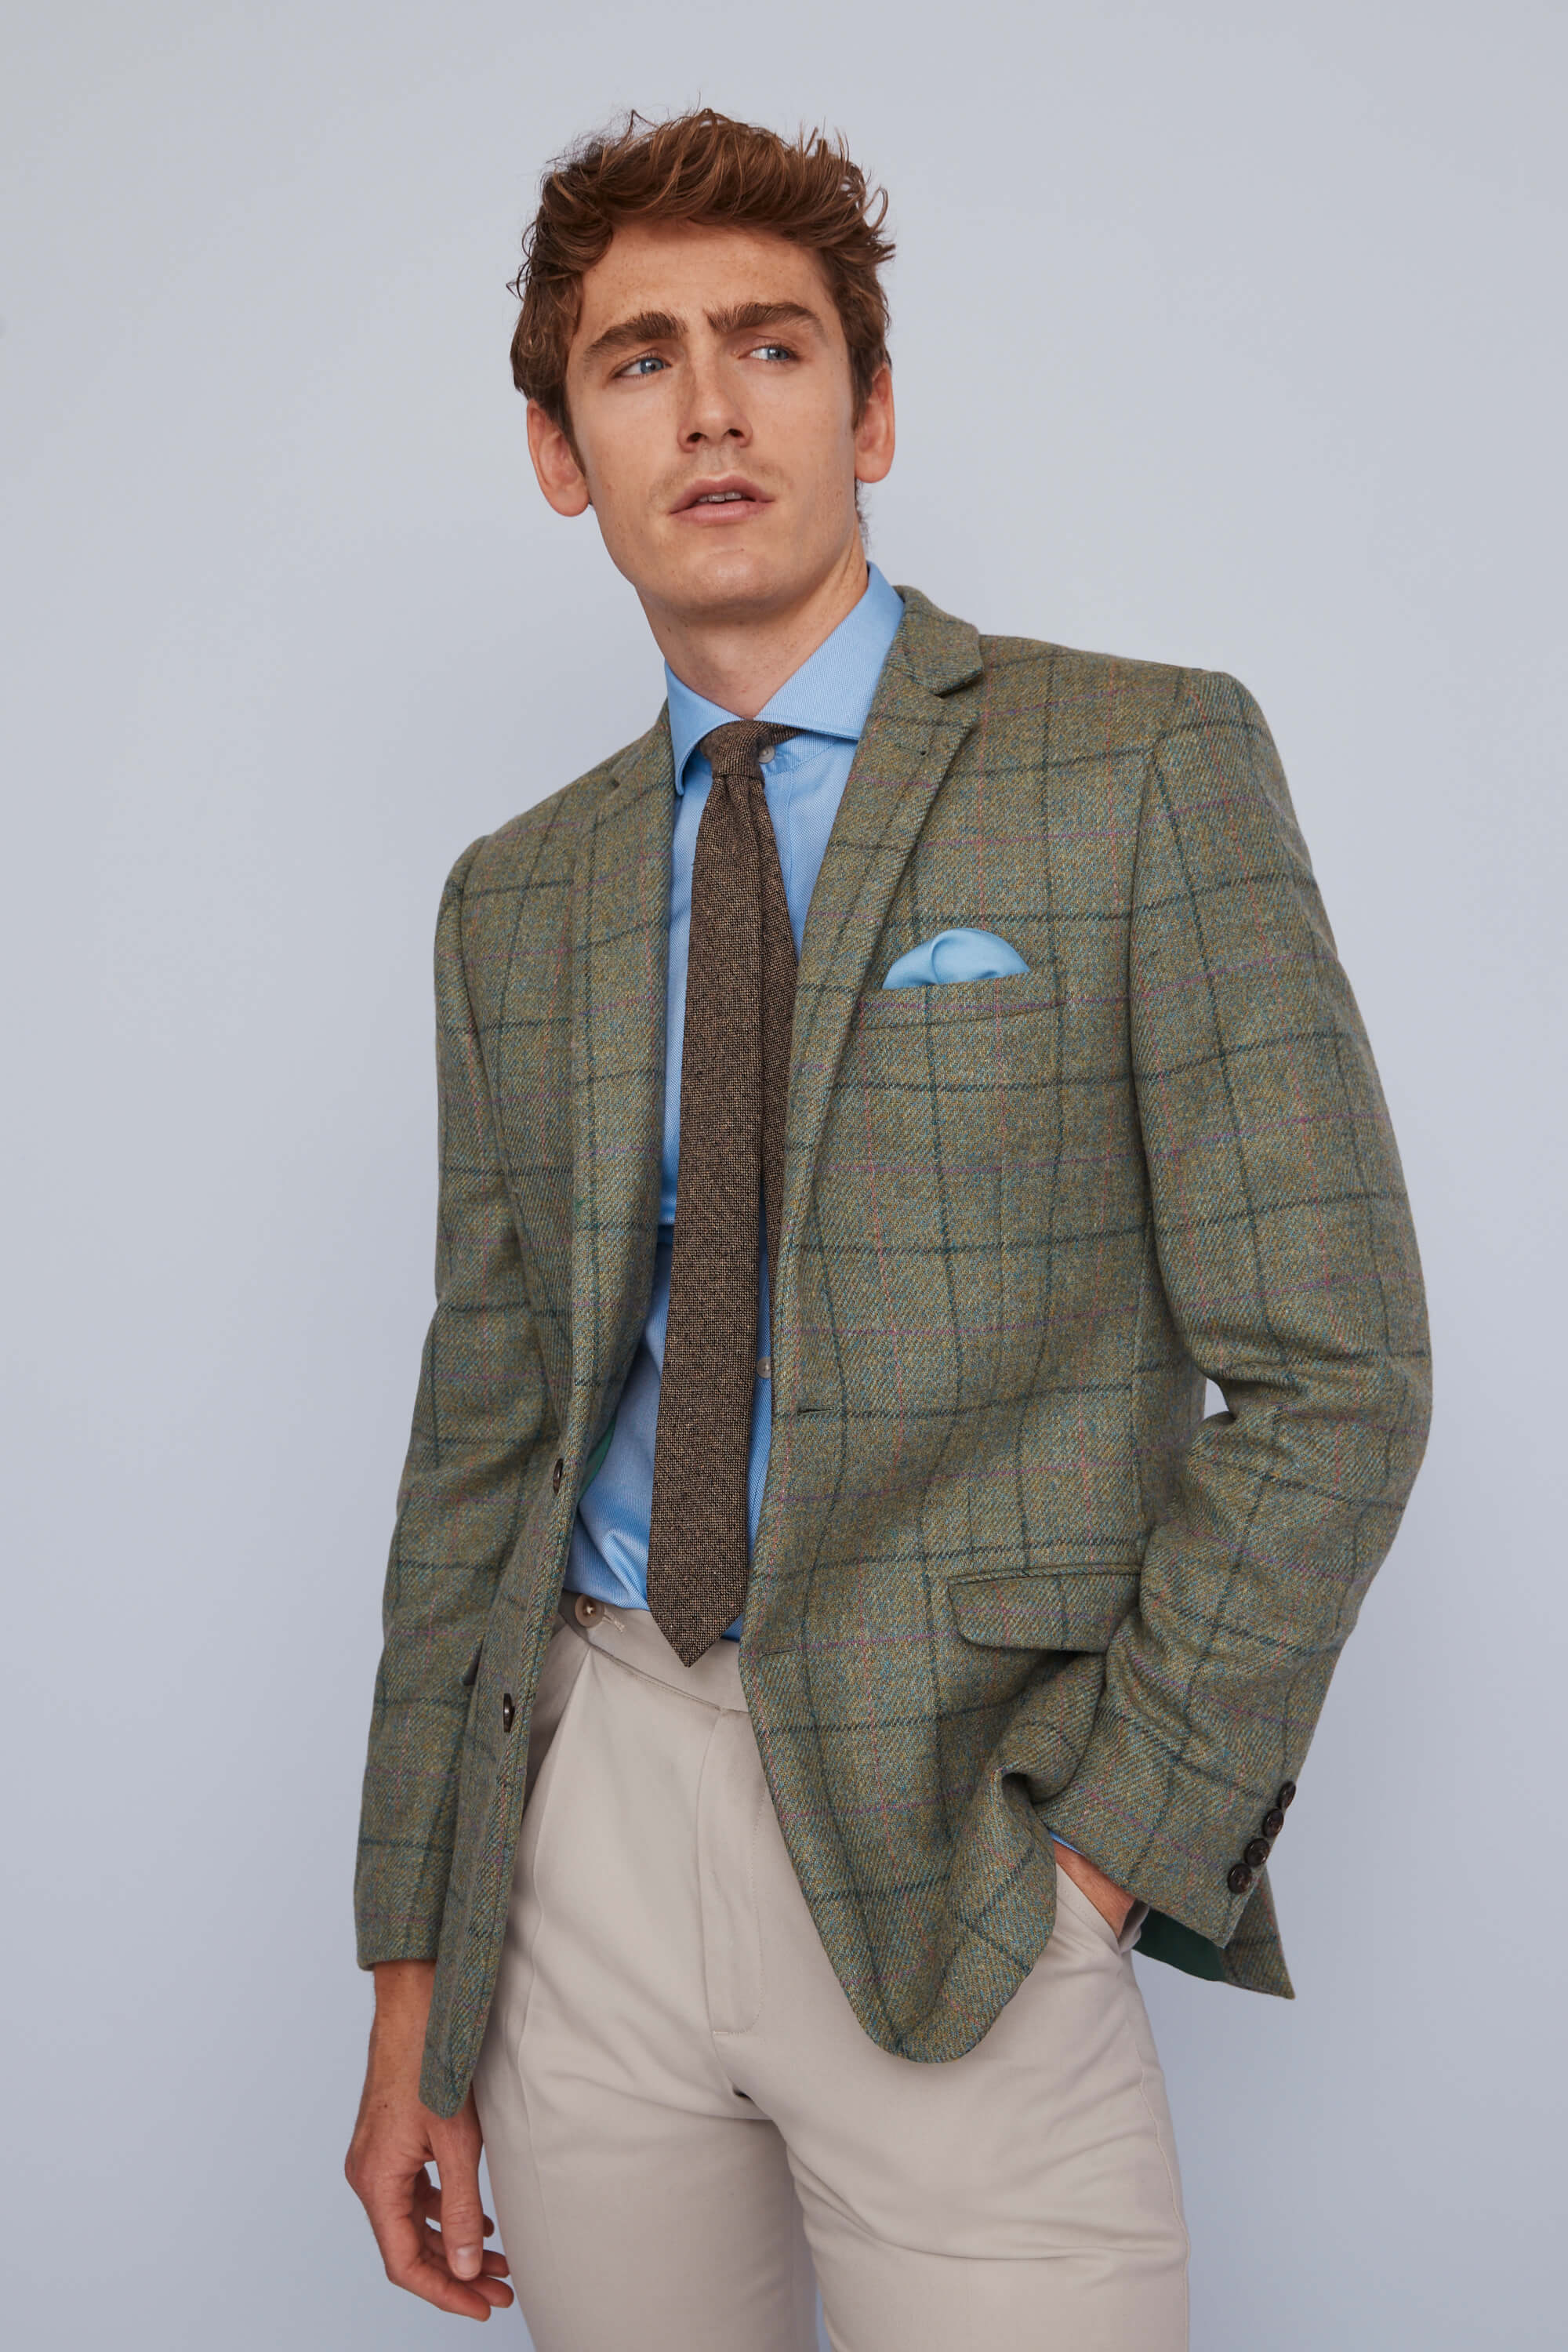 green tweed jacket outfit Off 76%